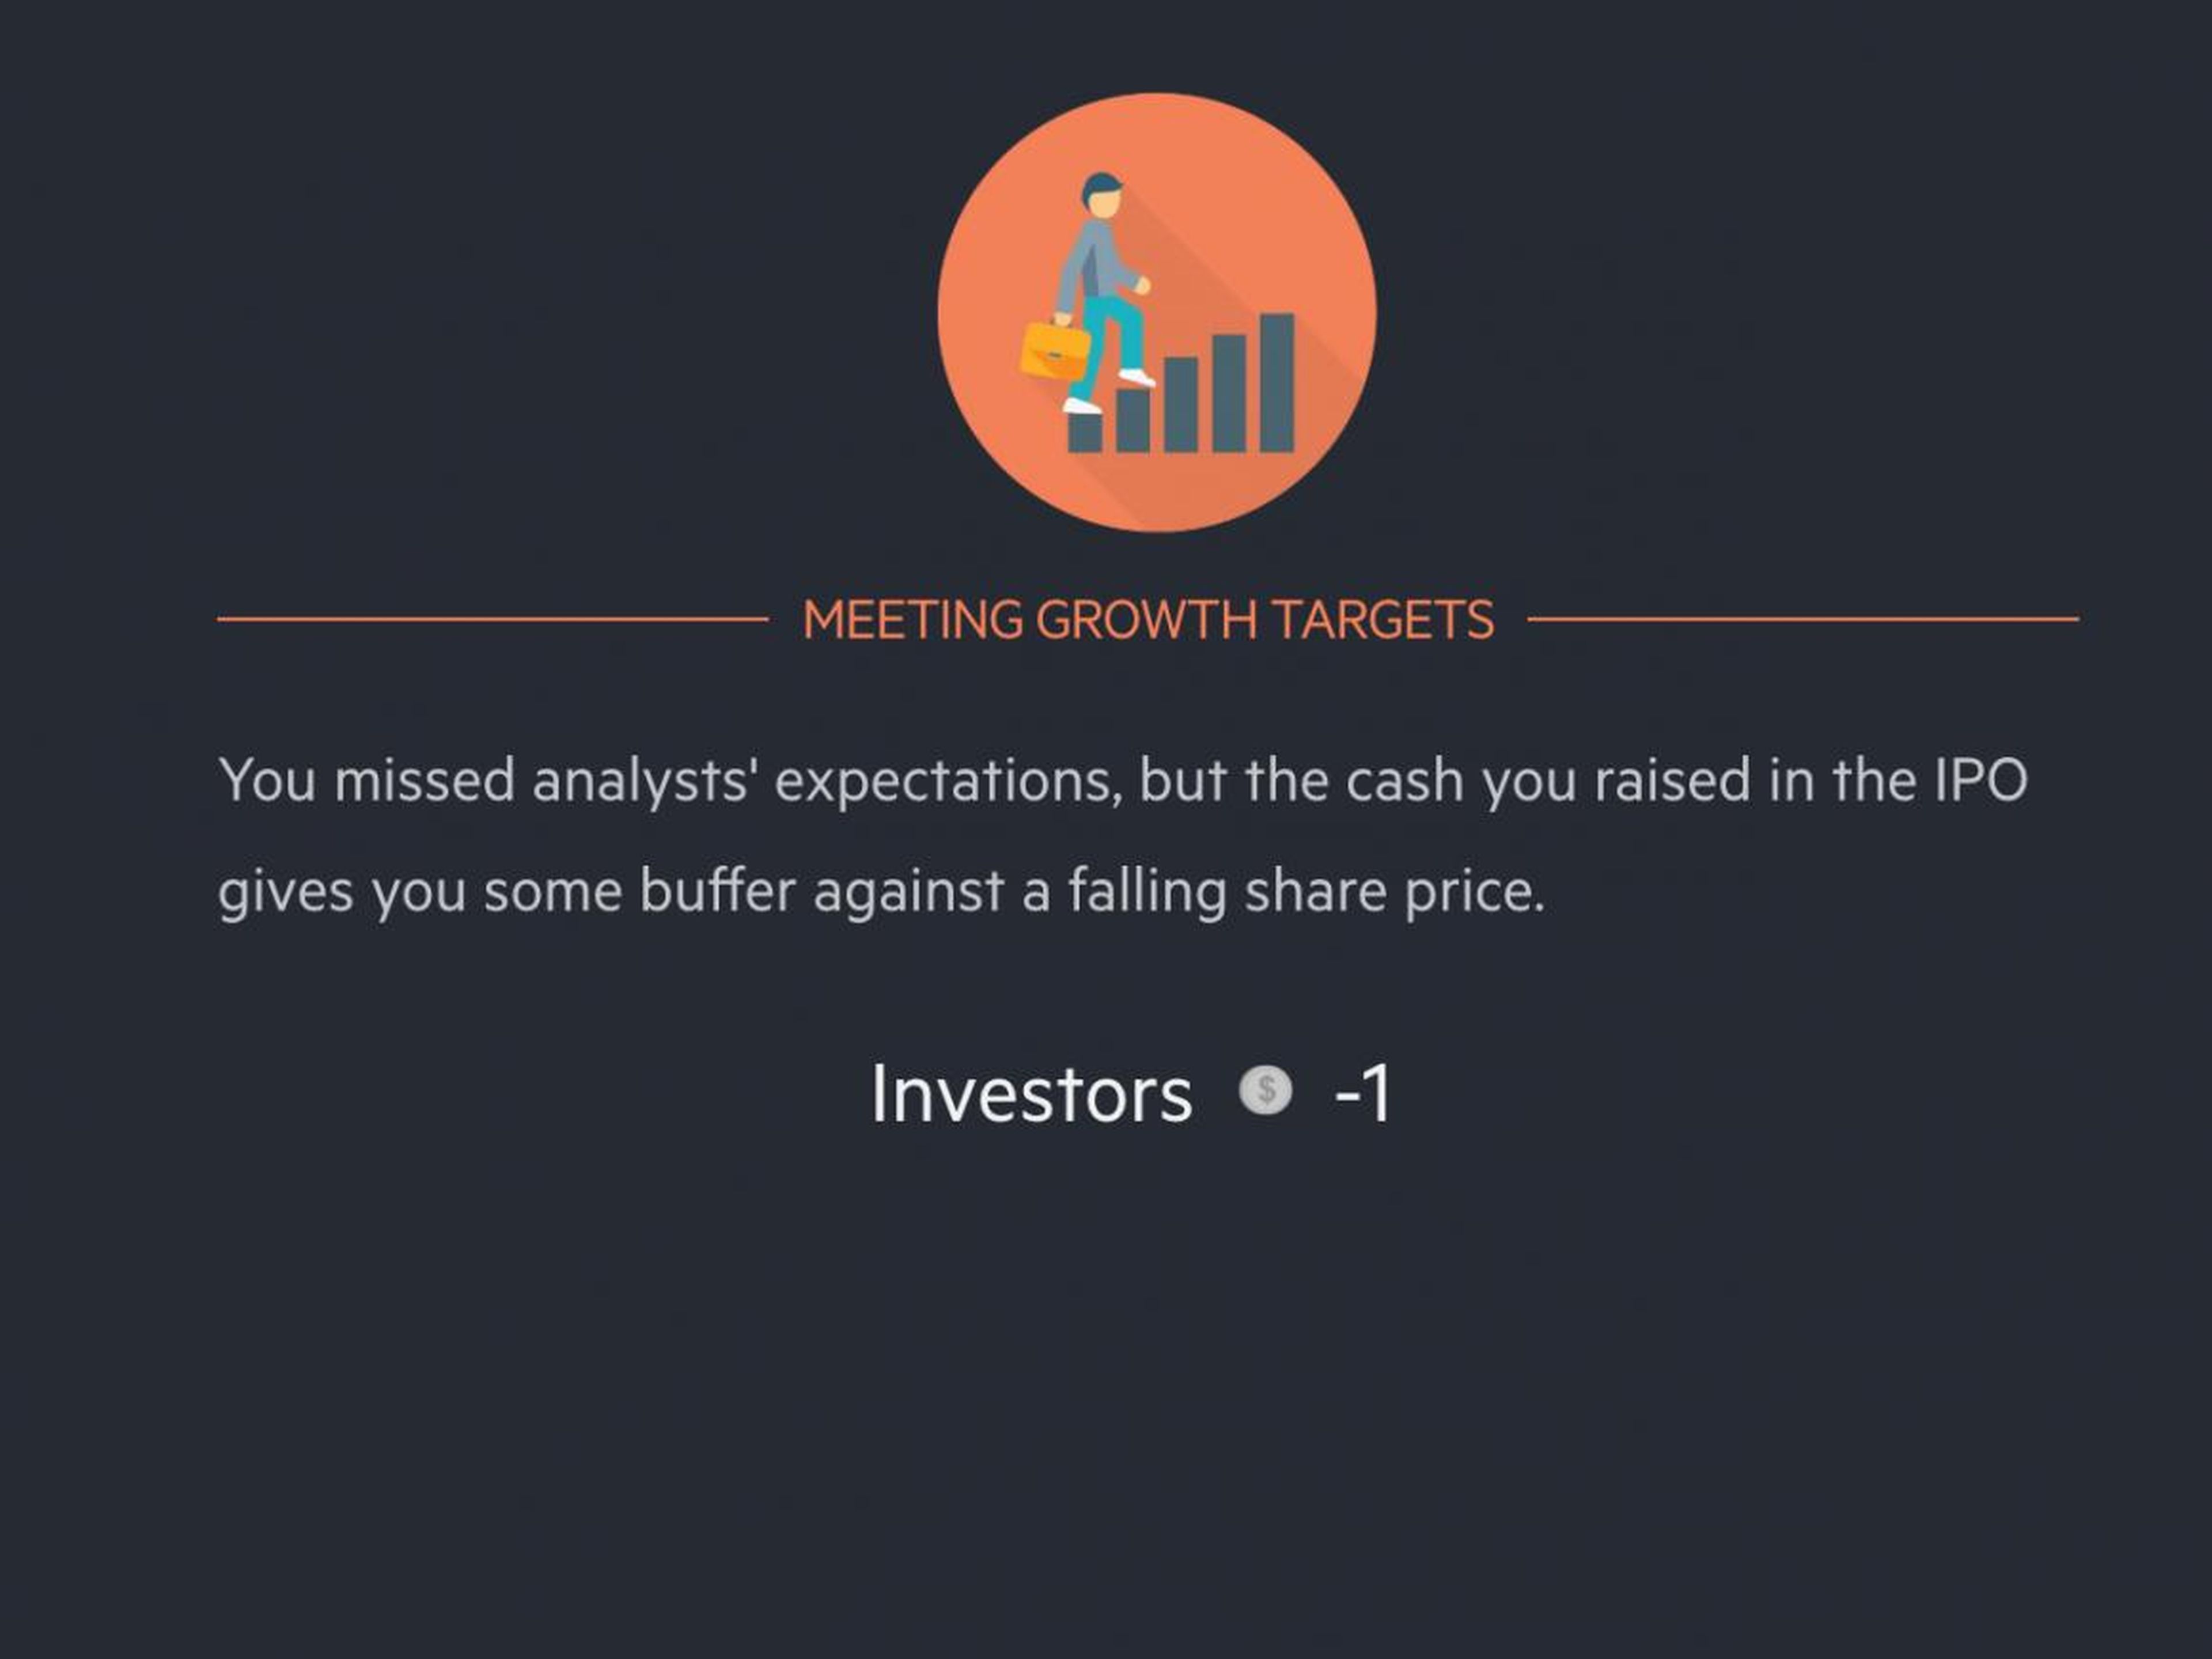 Growth targets didn't do so well, even though I gave 3 resources.